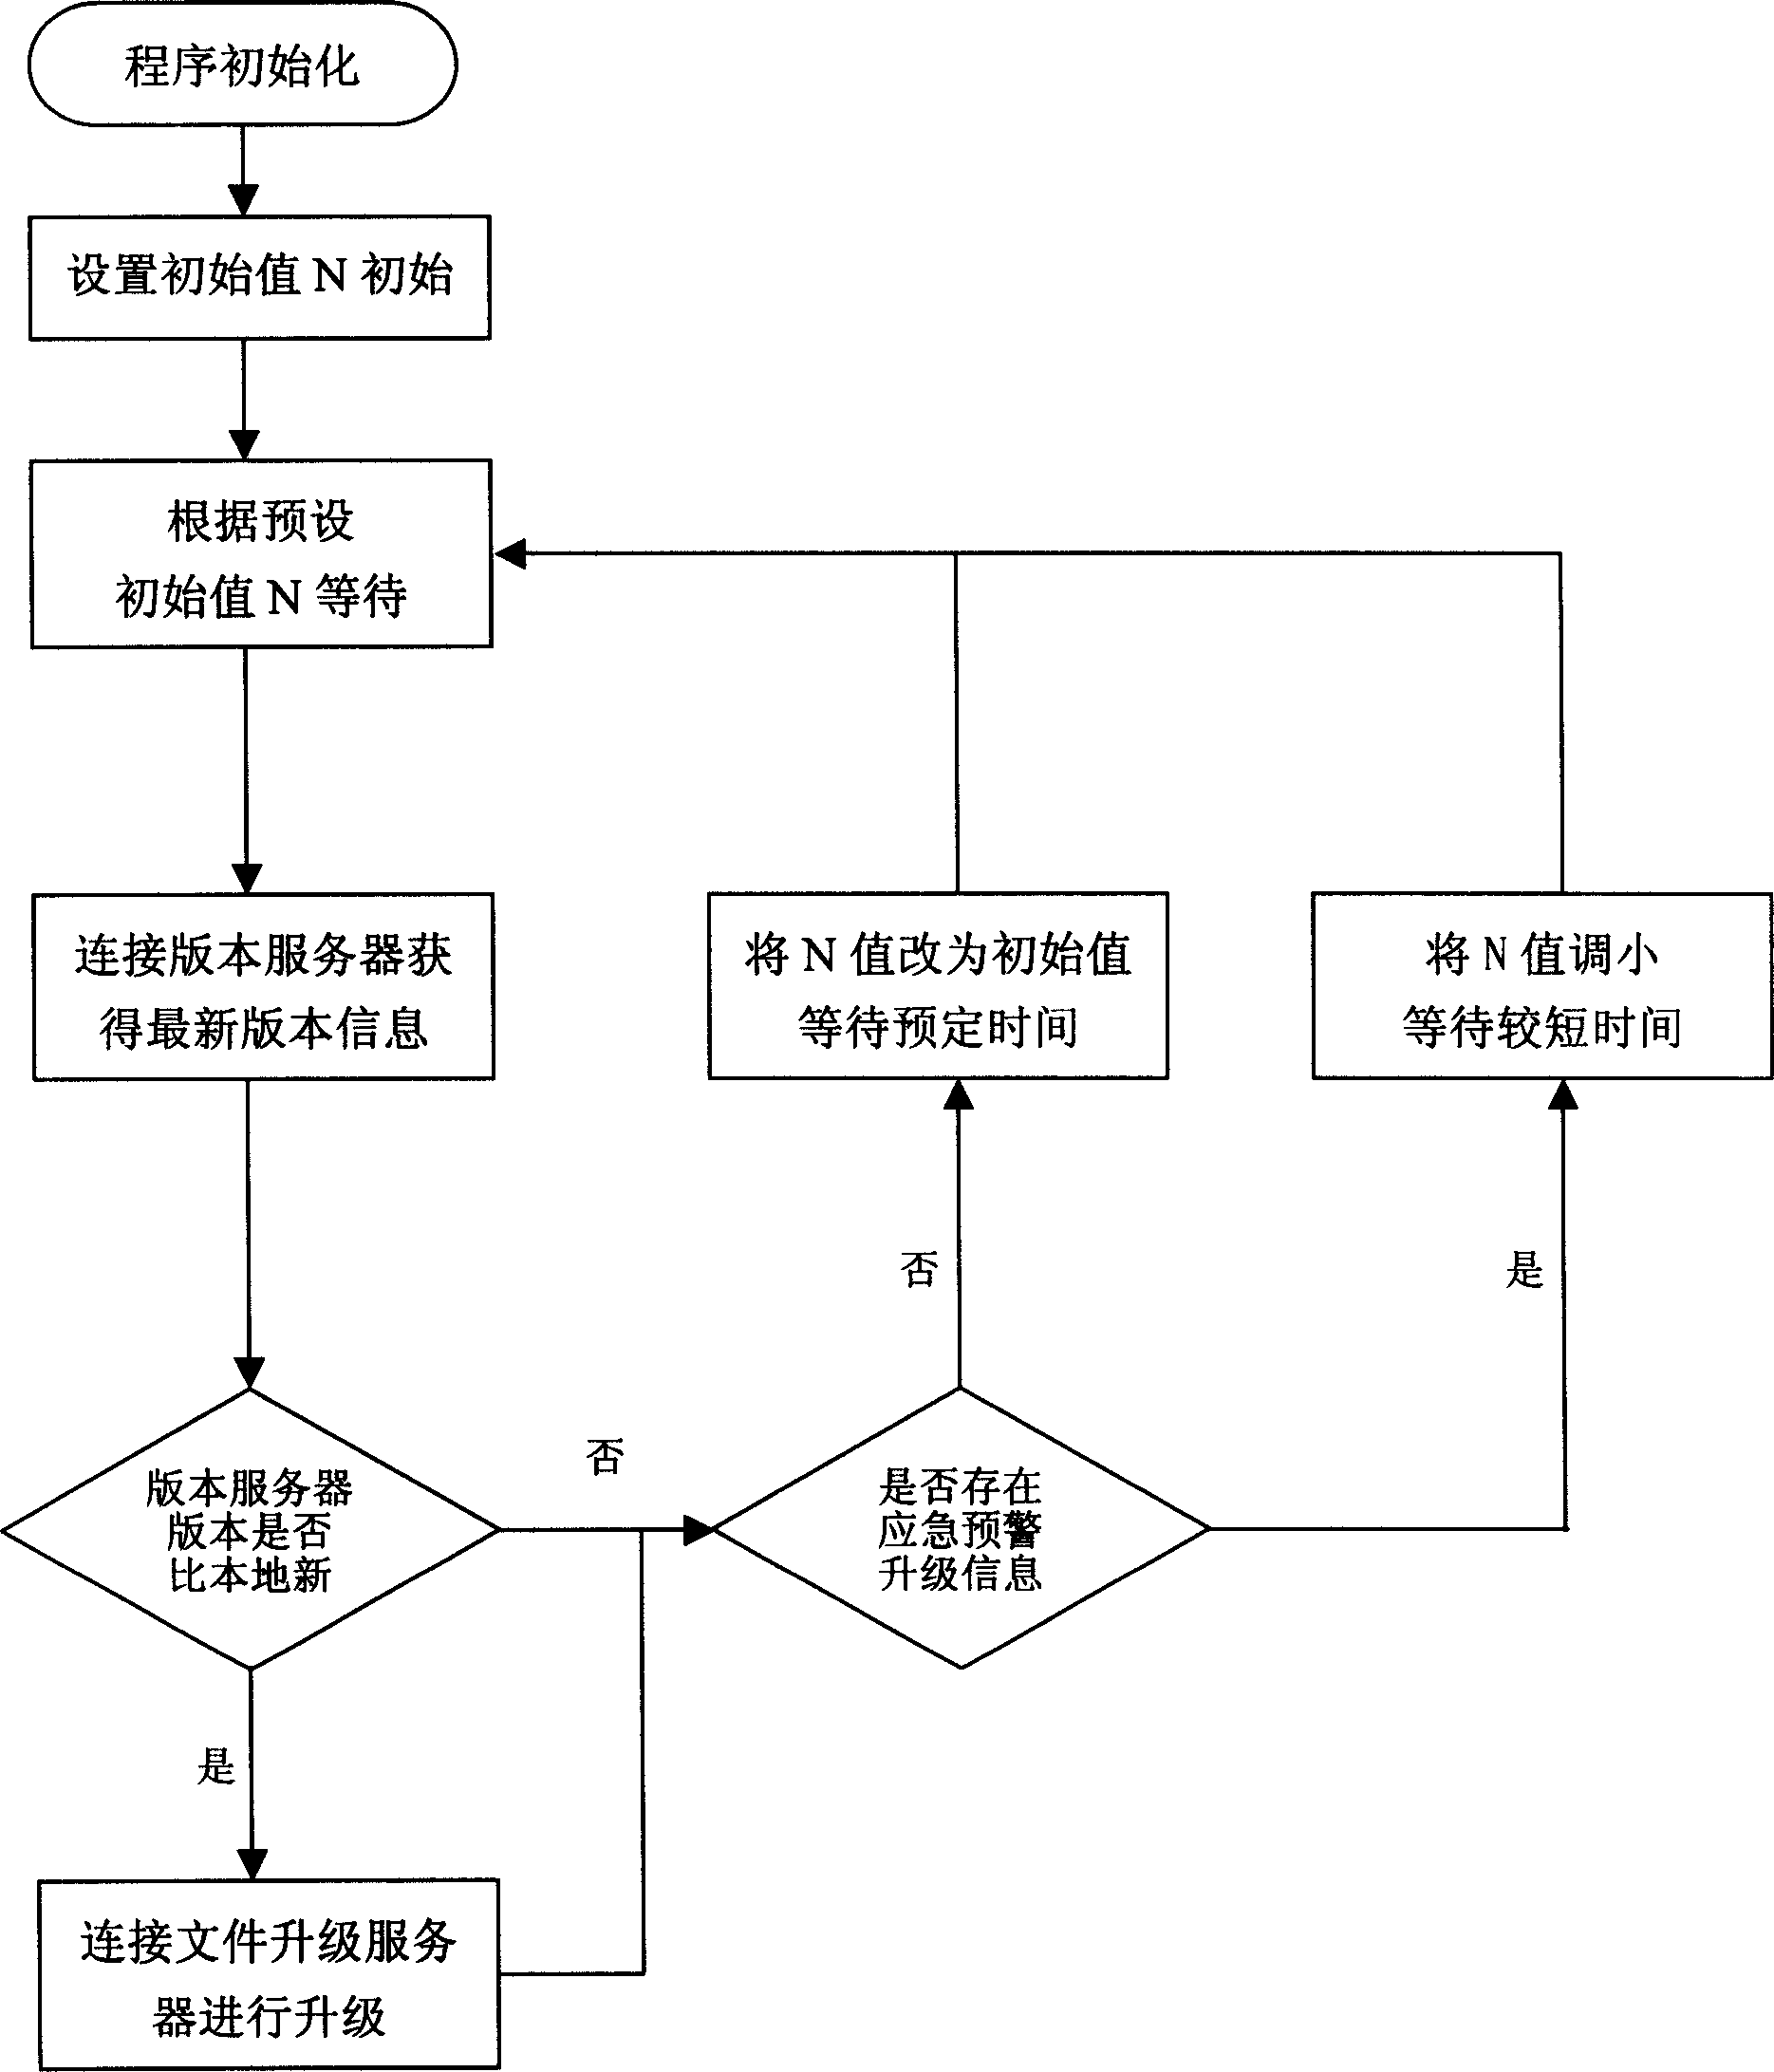 Software upgrading method for use in computer systems